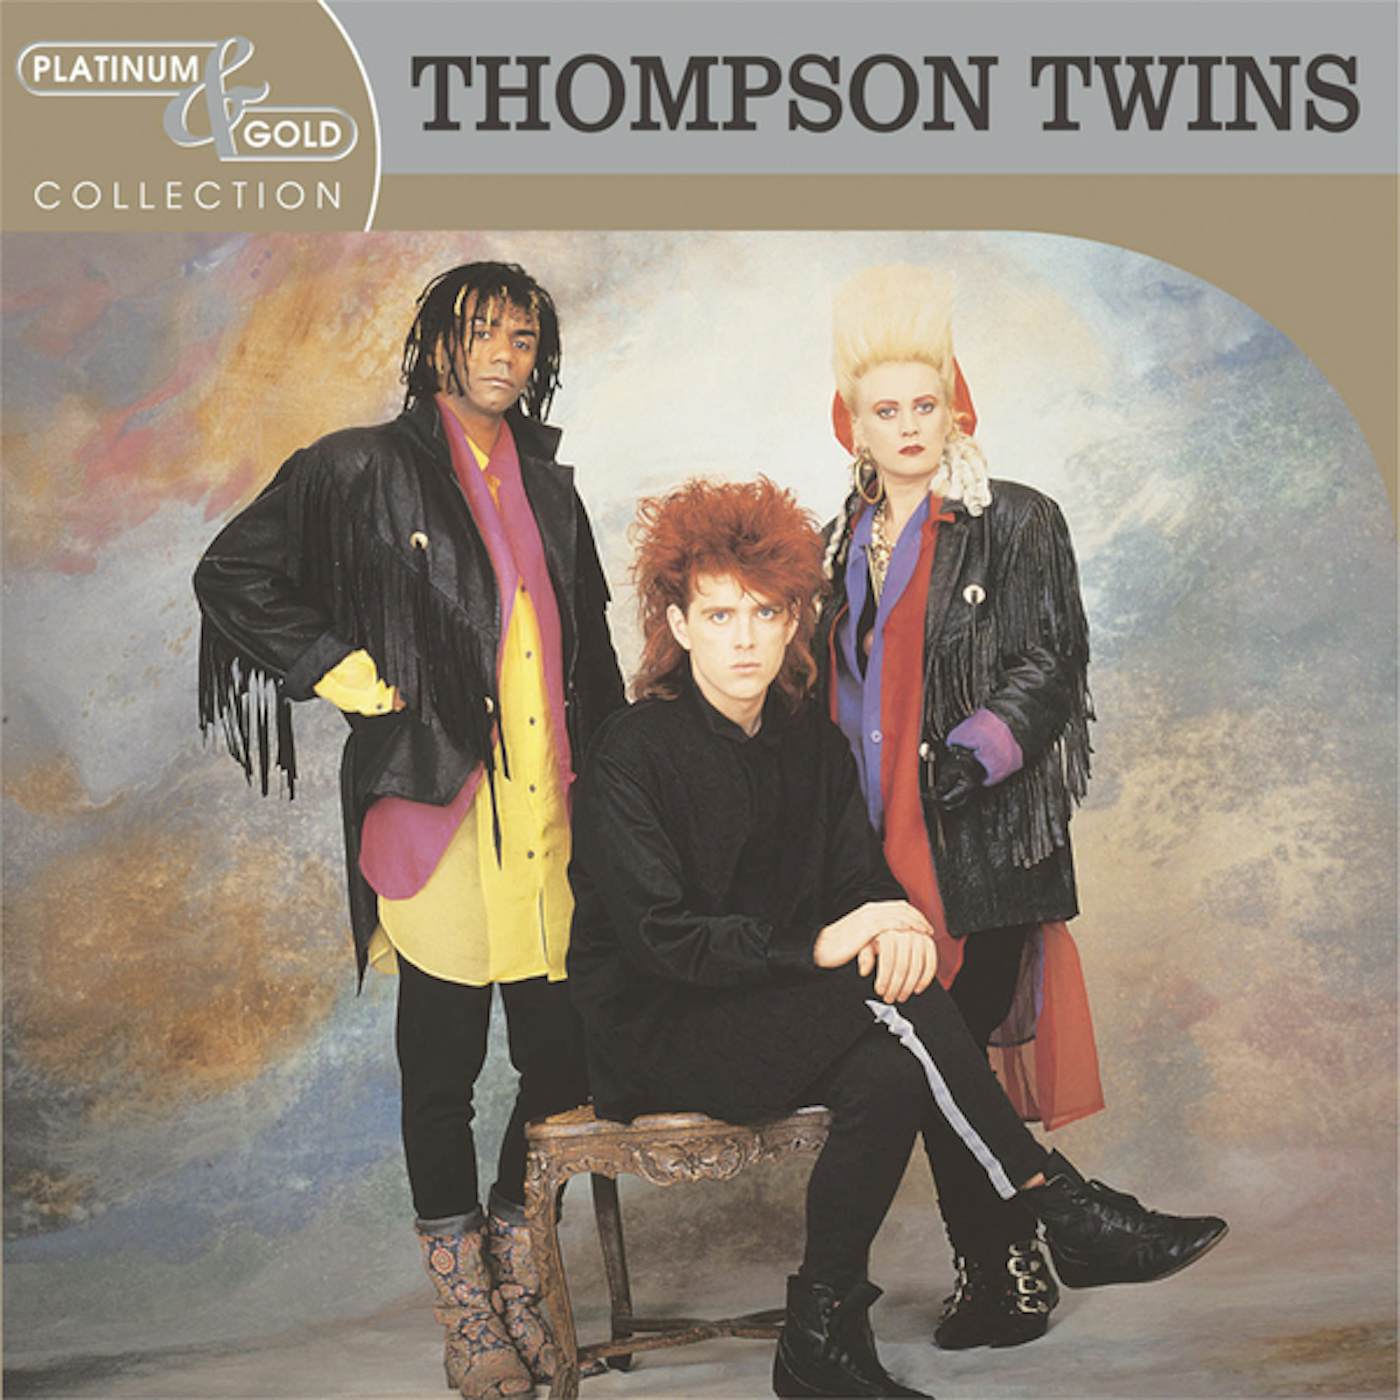 Thompson Twins PLATINUM & GOLD COLLECTION CD